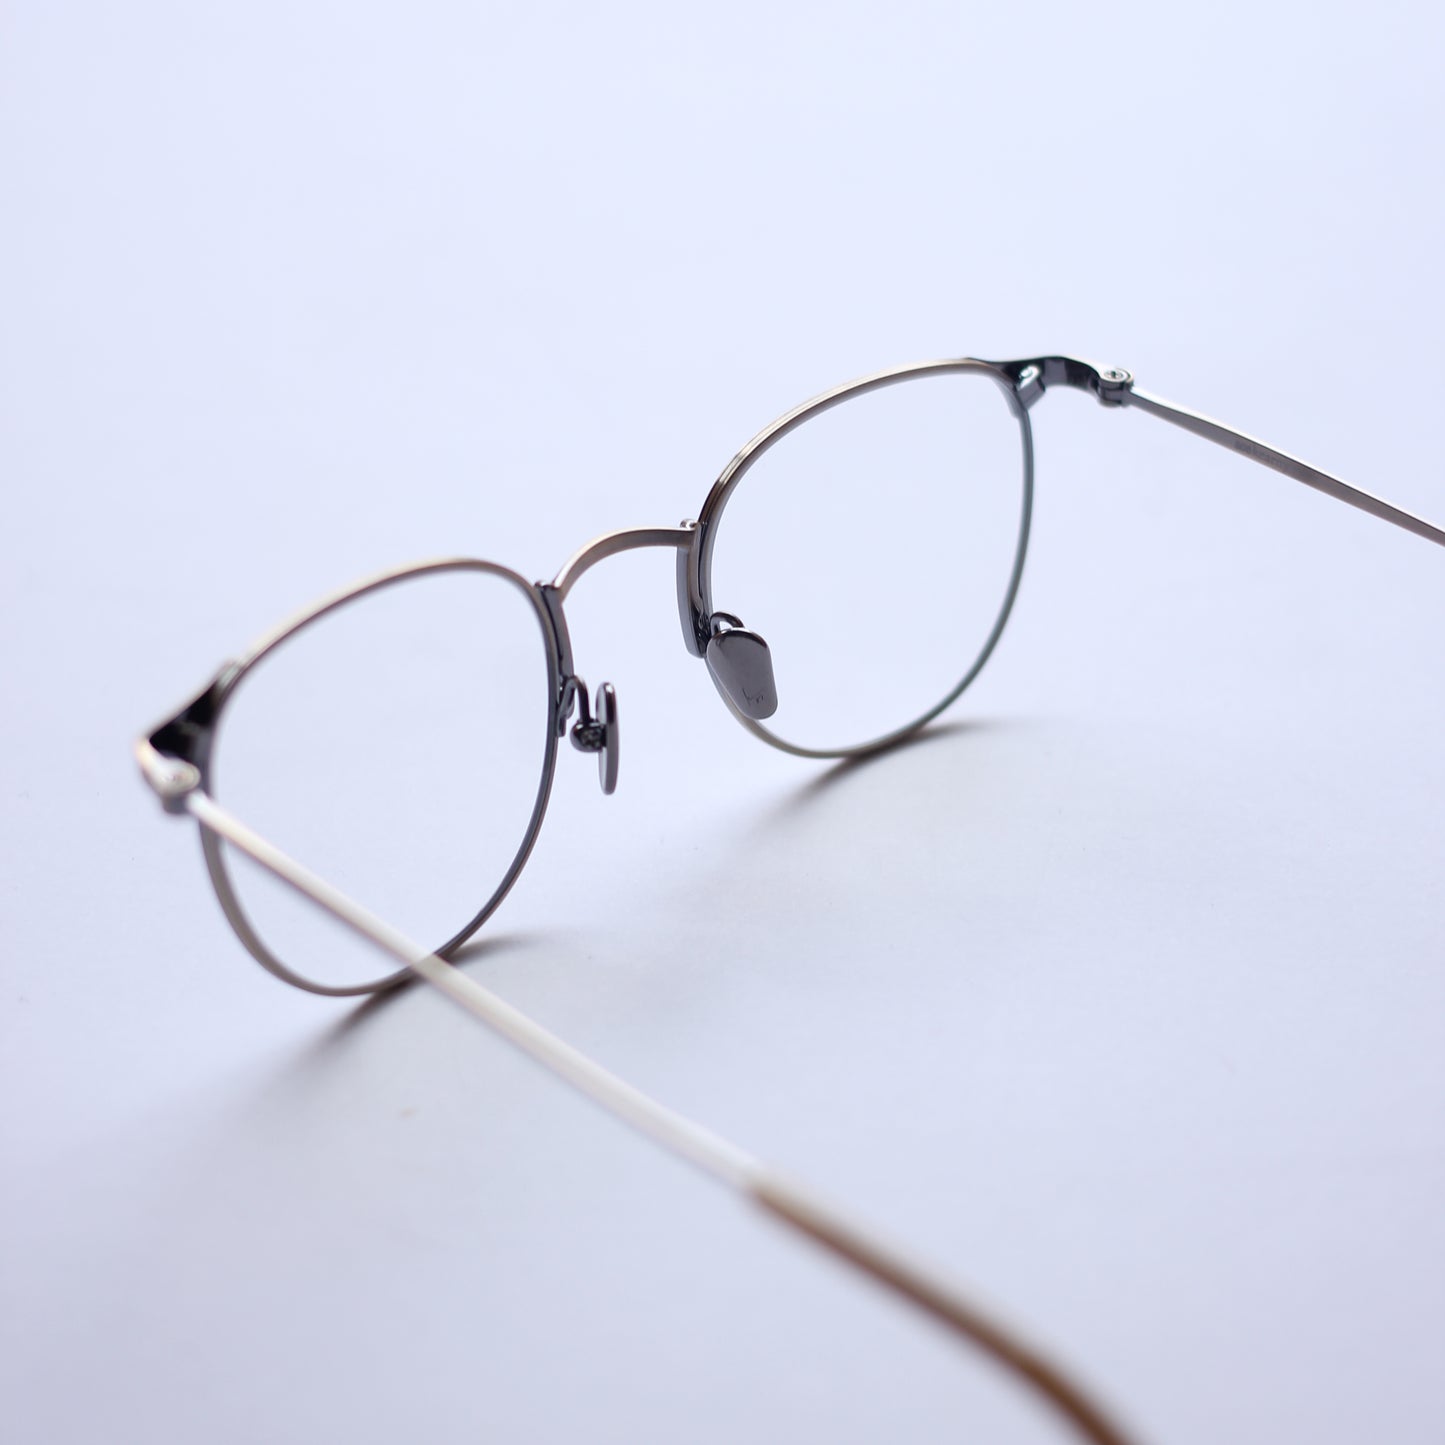 acekearny/david "antique gold(clear lens)”